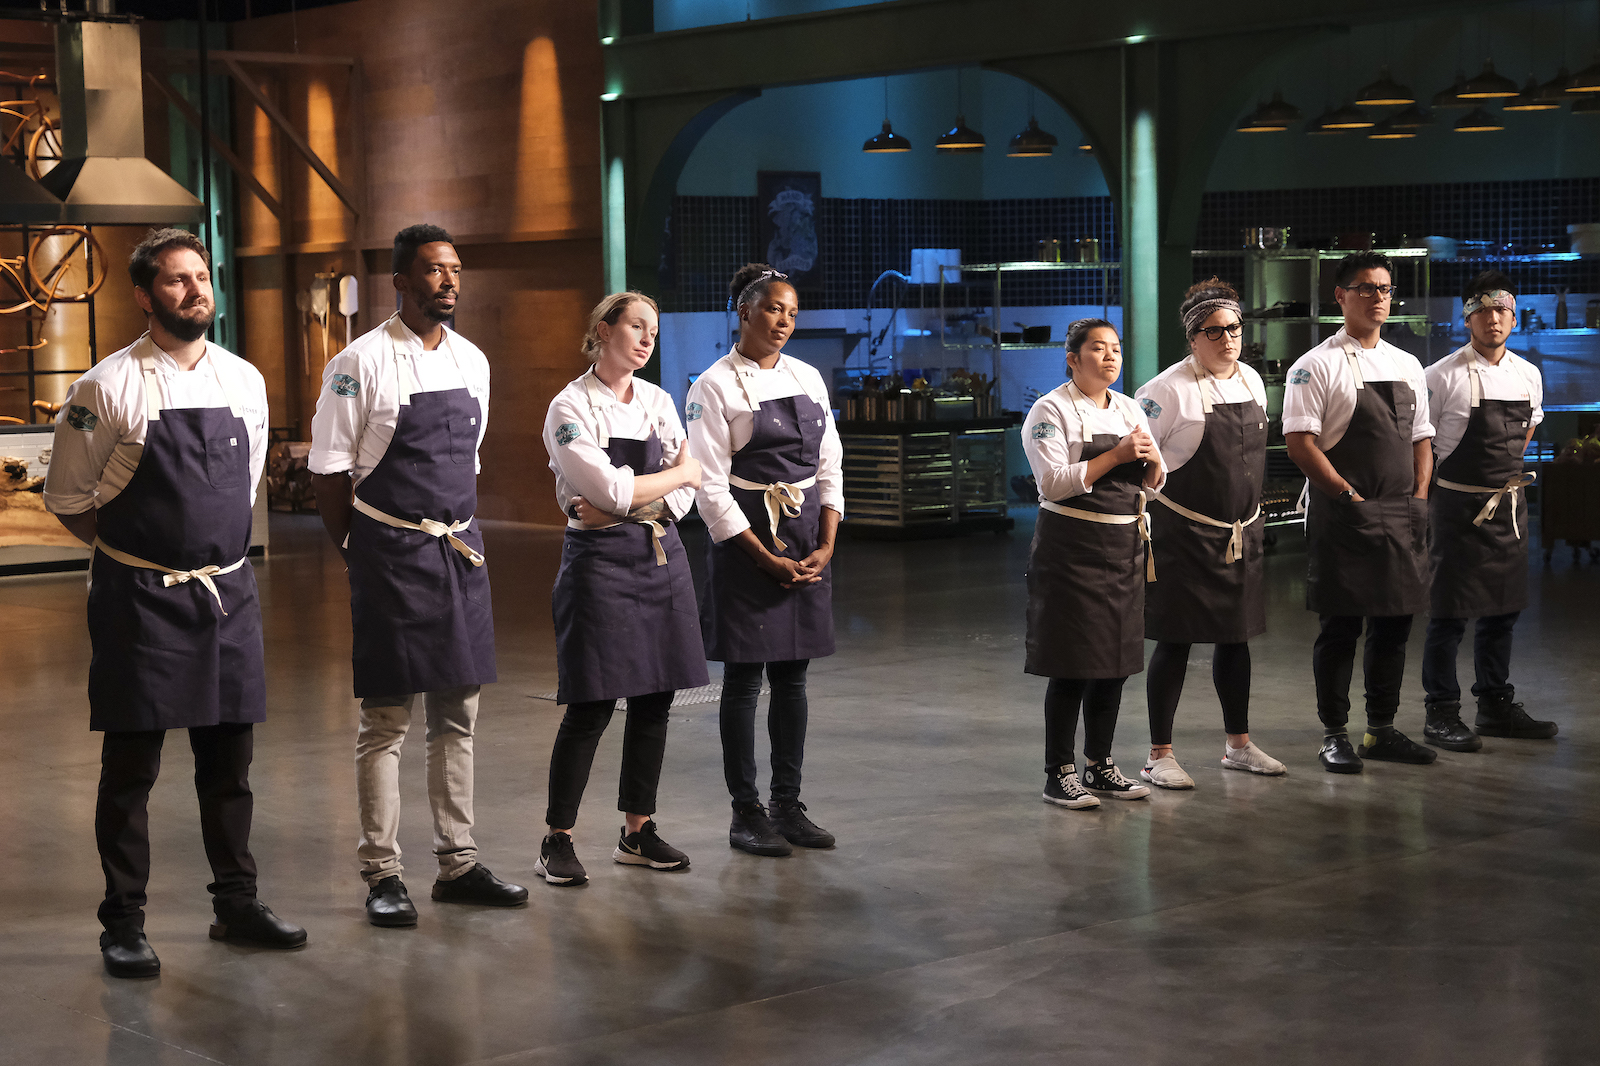 'Top Chef' cheftestants line up for evaluation during season 18